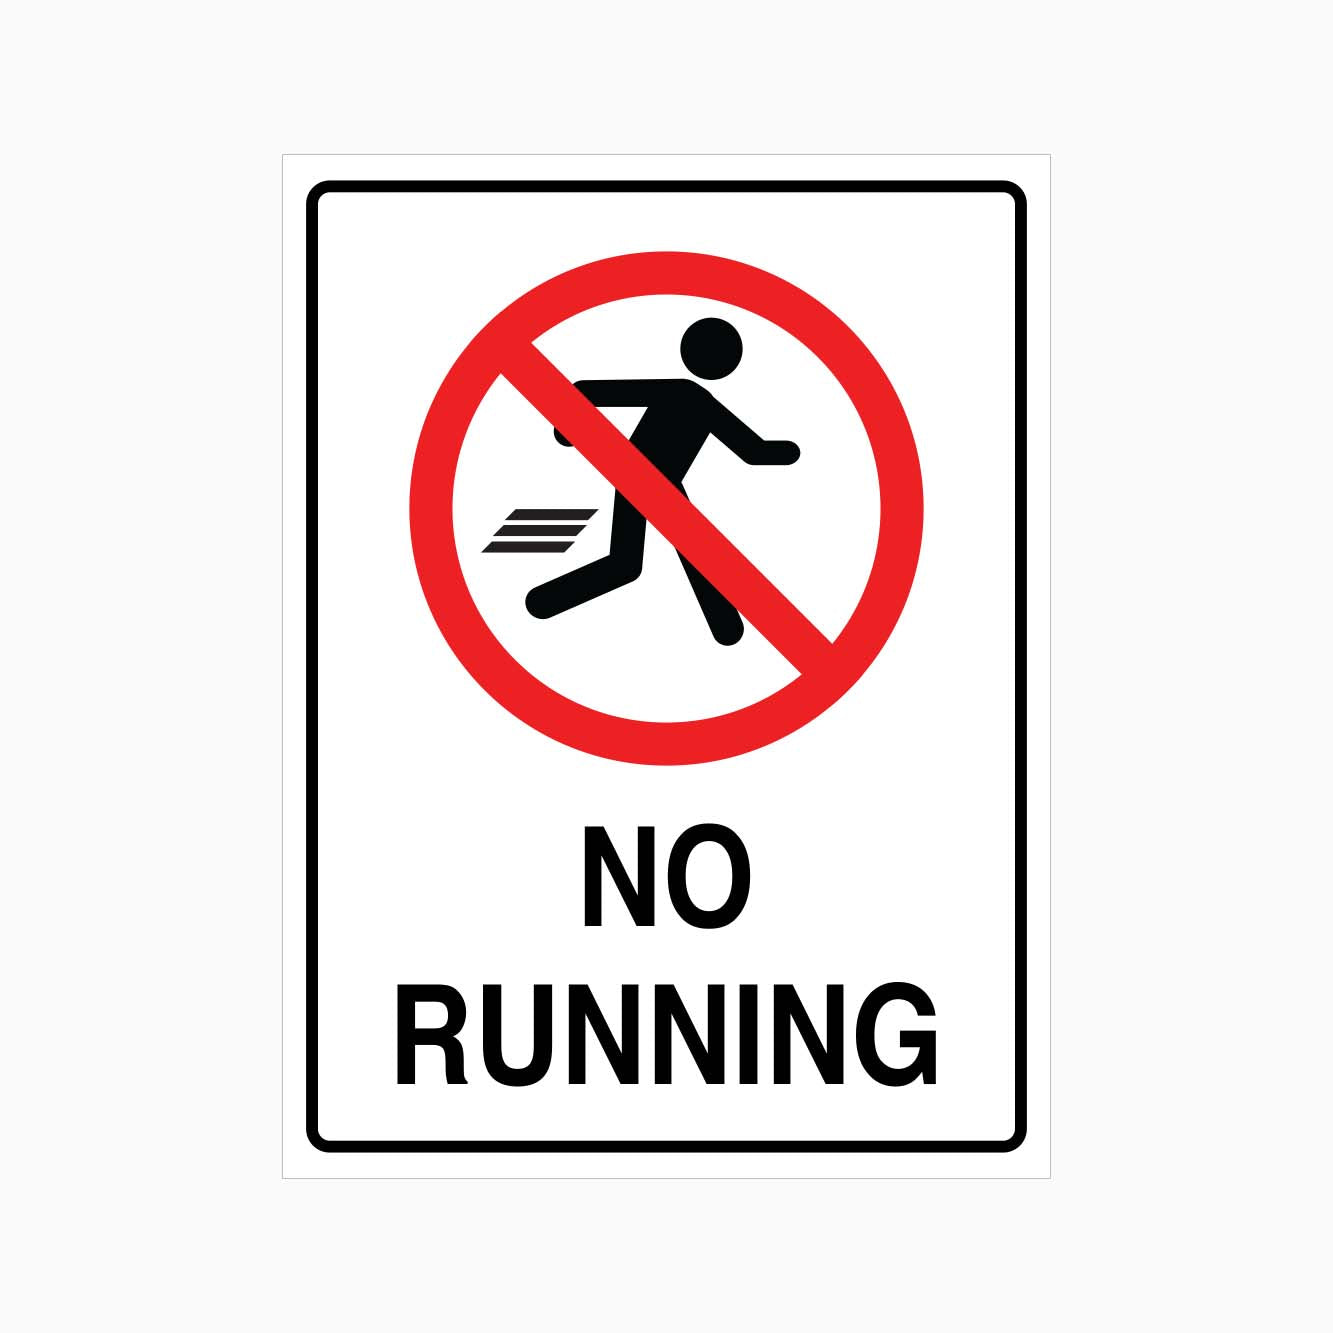 NO RUNNING SIGN - GET SIGNS